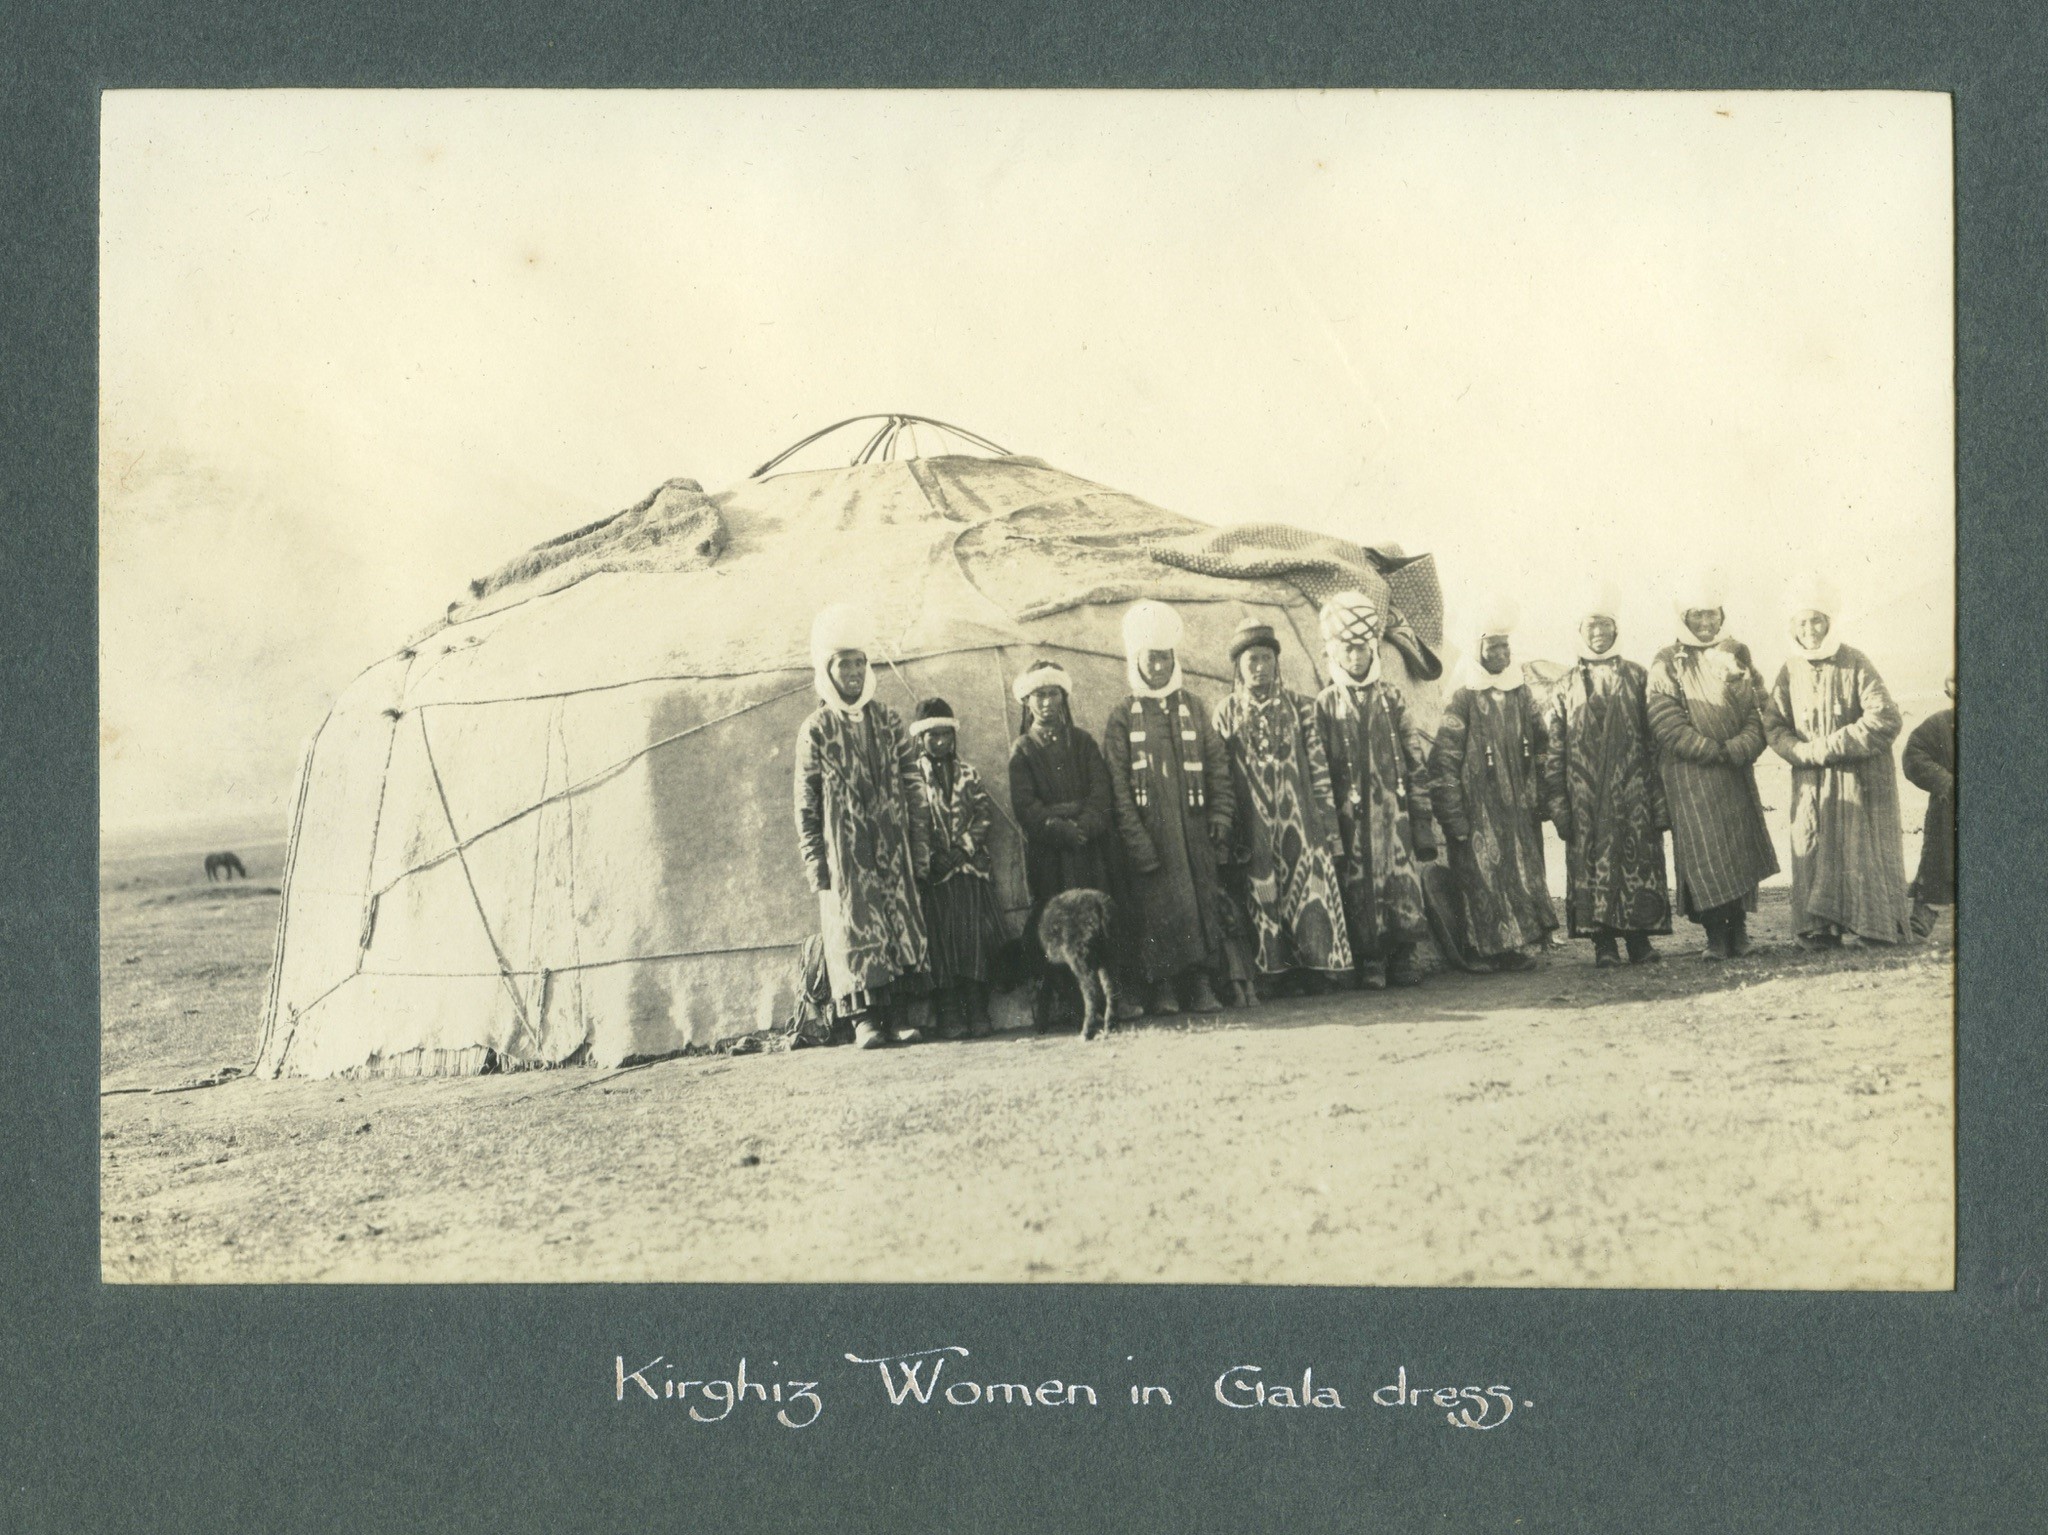 Kirghiz women standing together in front of a yurt.